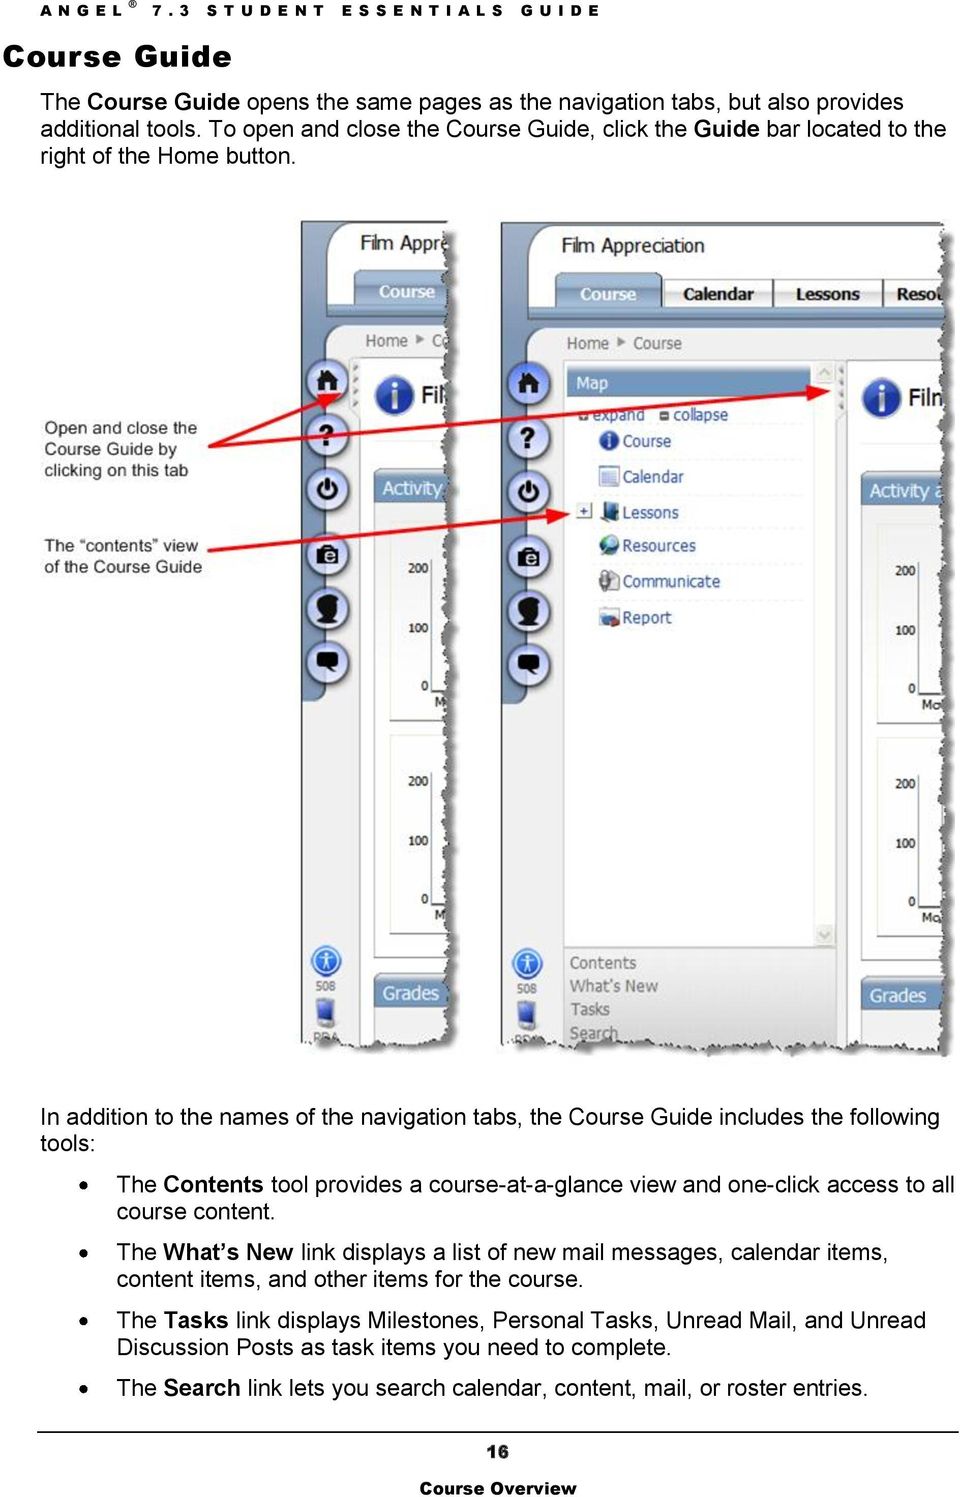 In addition to the names of the navigation tabs, the Course Guide includes the following tools: The Contents tool provides a course-at-a-glance view and one-click access to all course